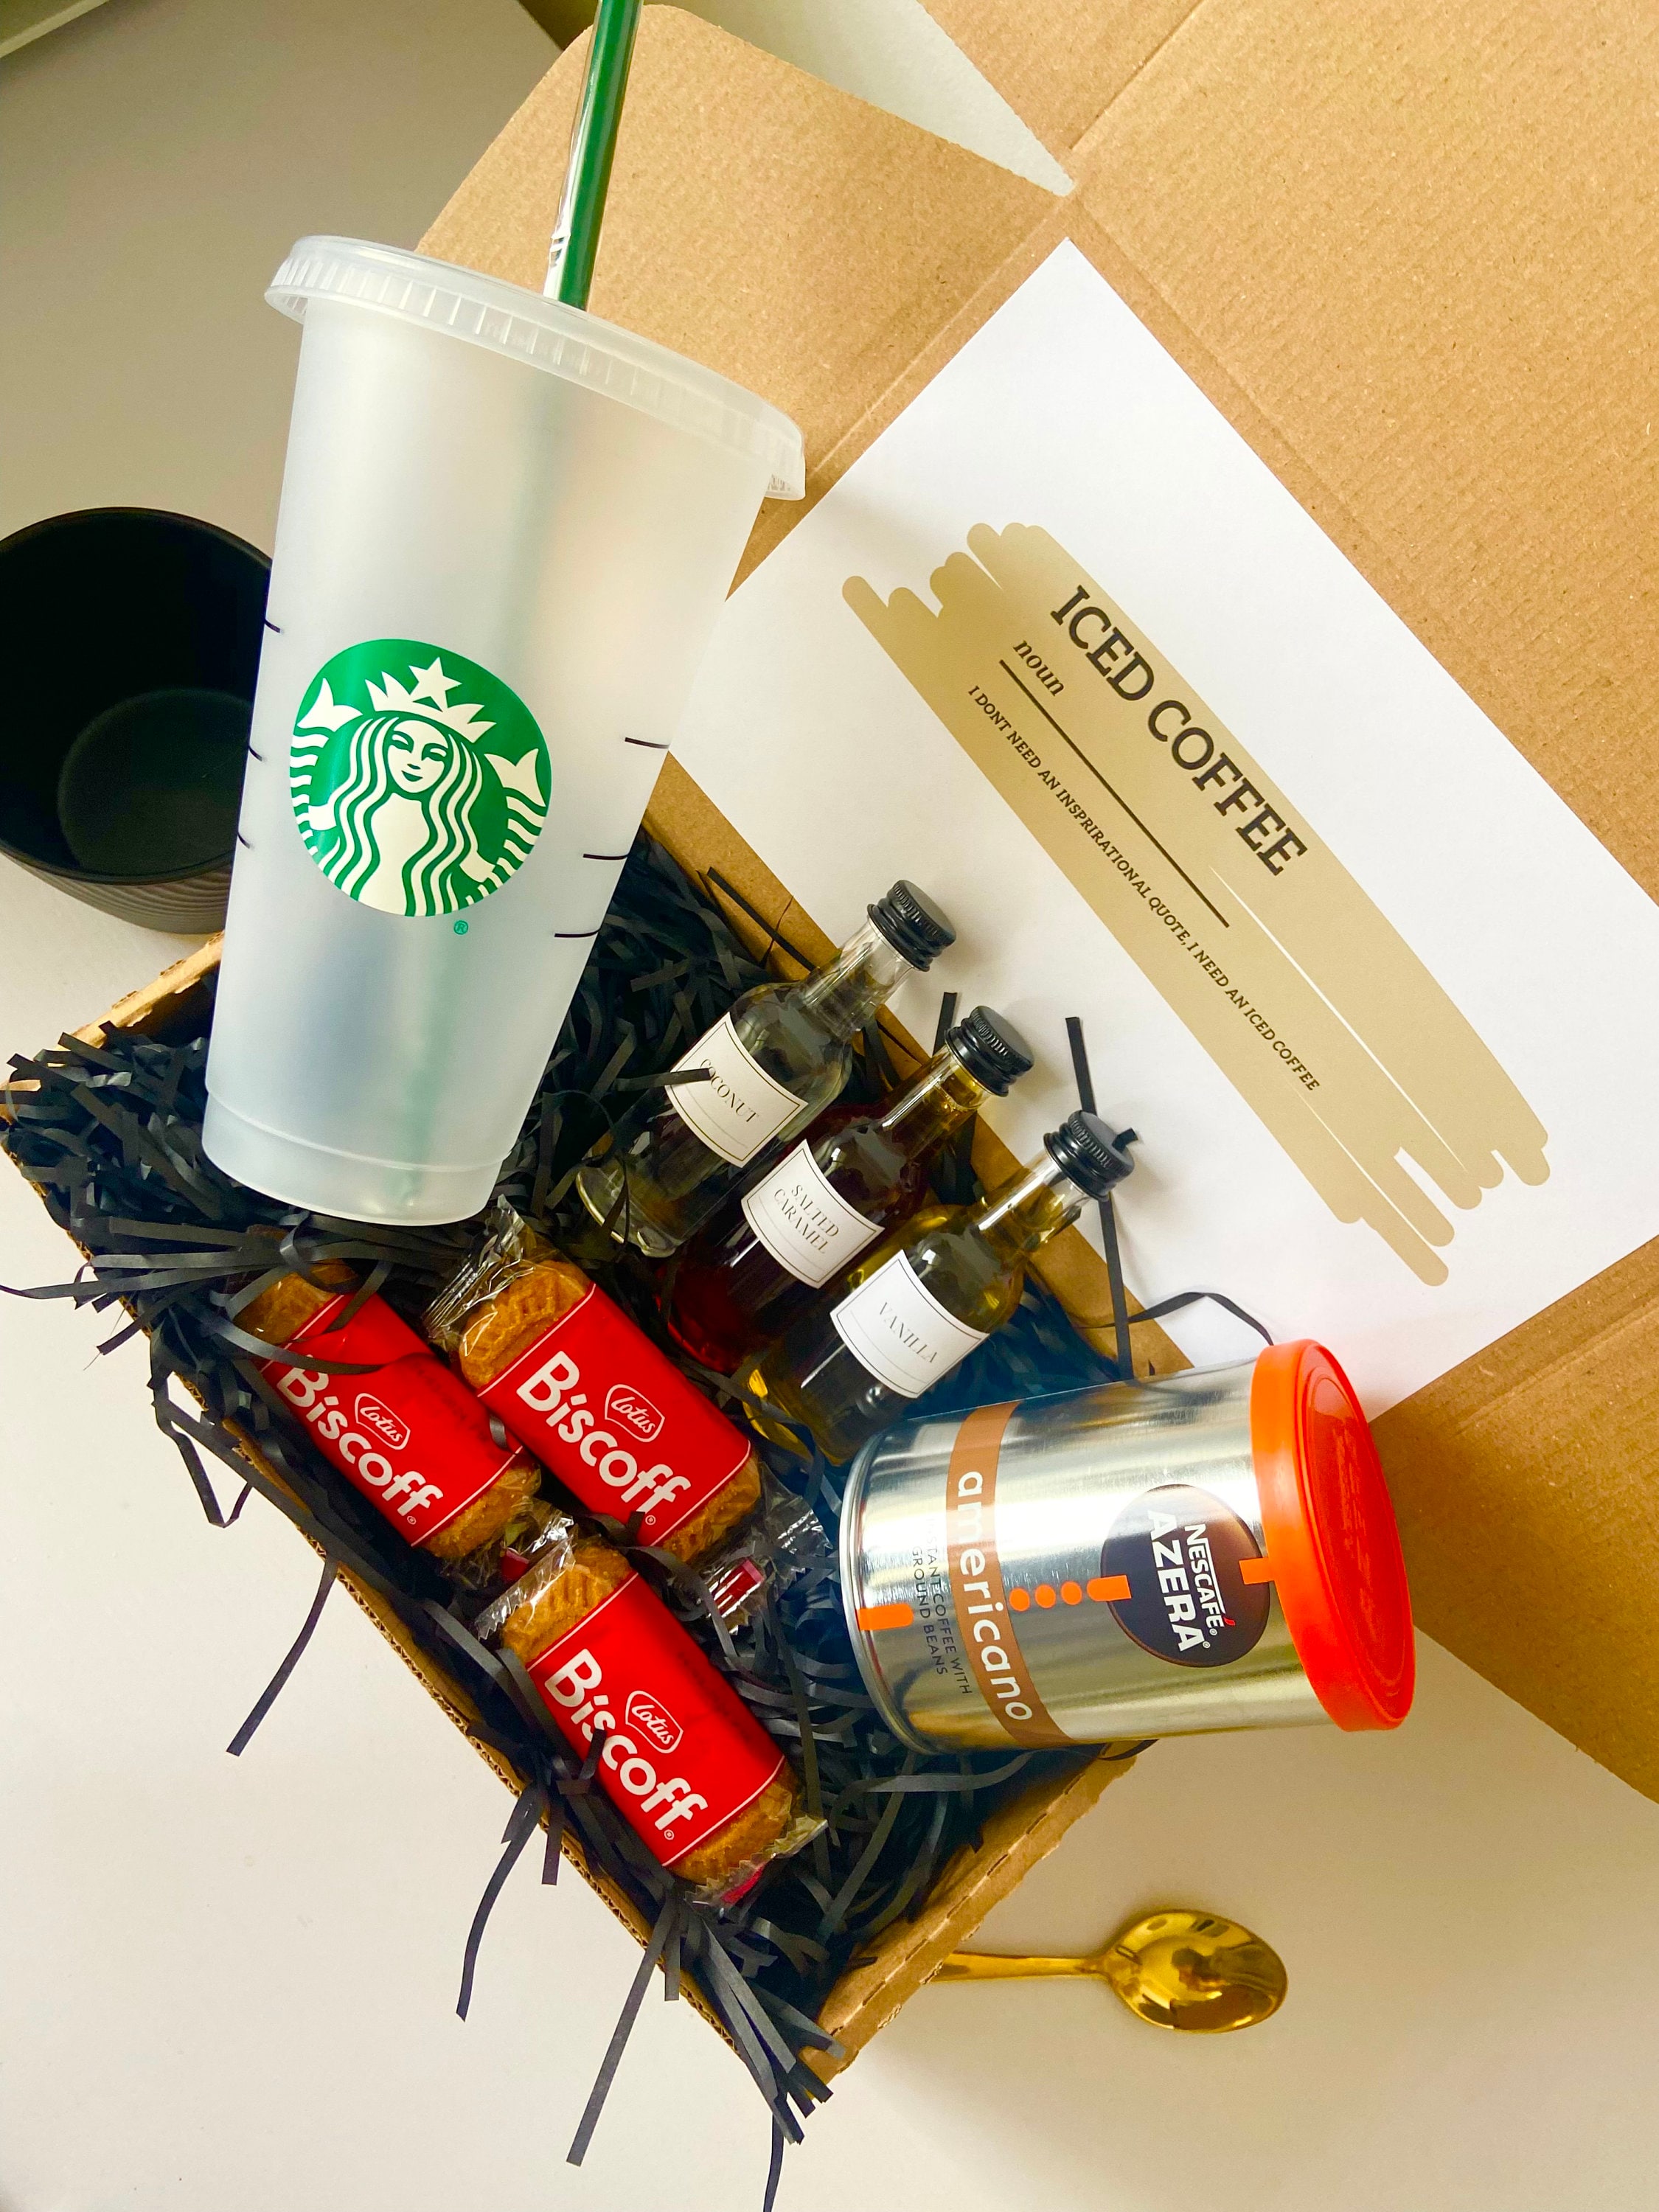 Ultimate Iced Coffee Kit Coffee Syrup Set Starbucks Cold Cup Kit Flavoured Coffee  Gift Coffee Lovers Gift -  Israel